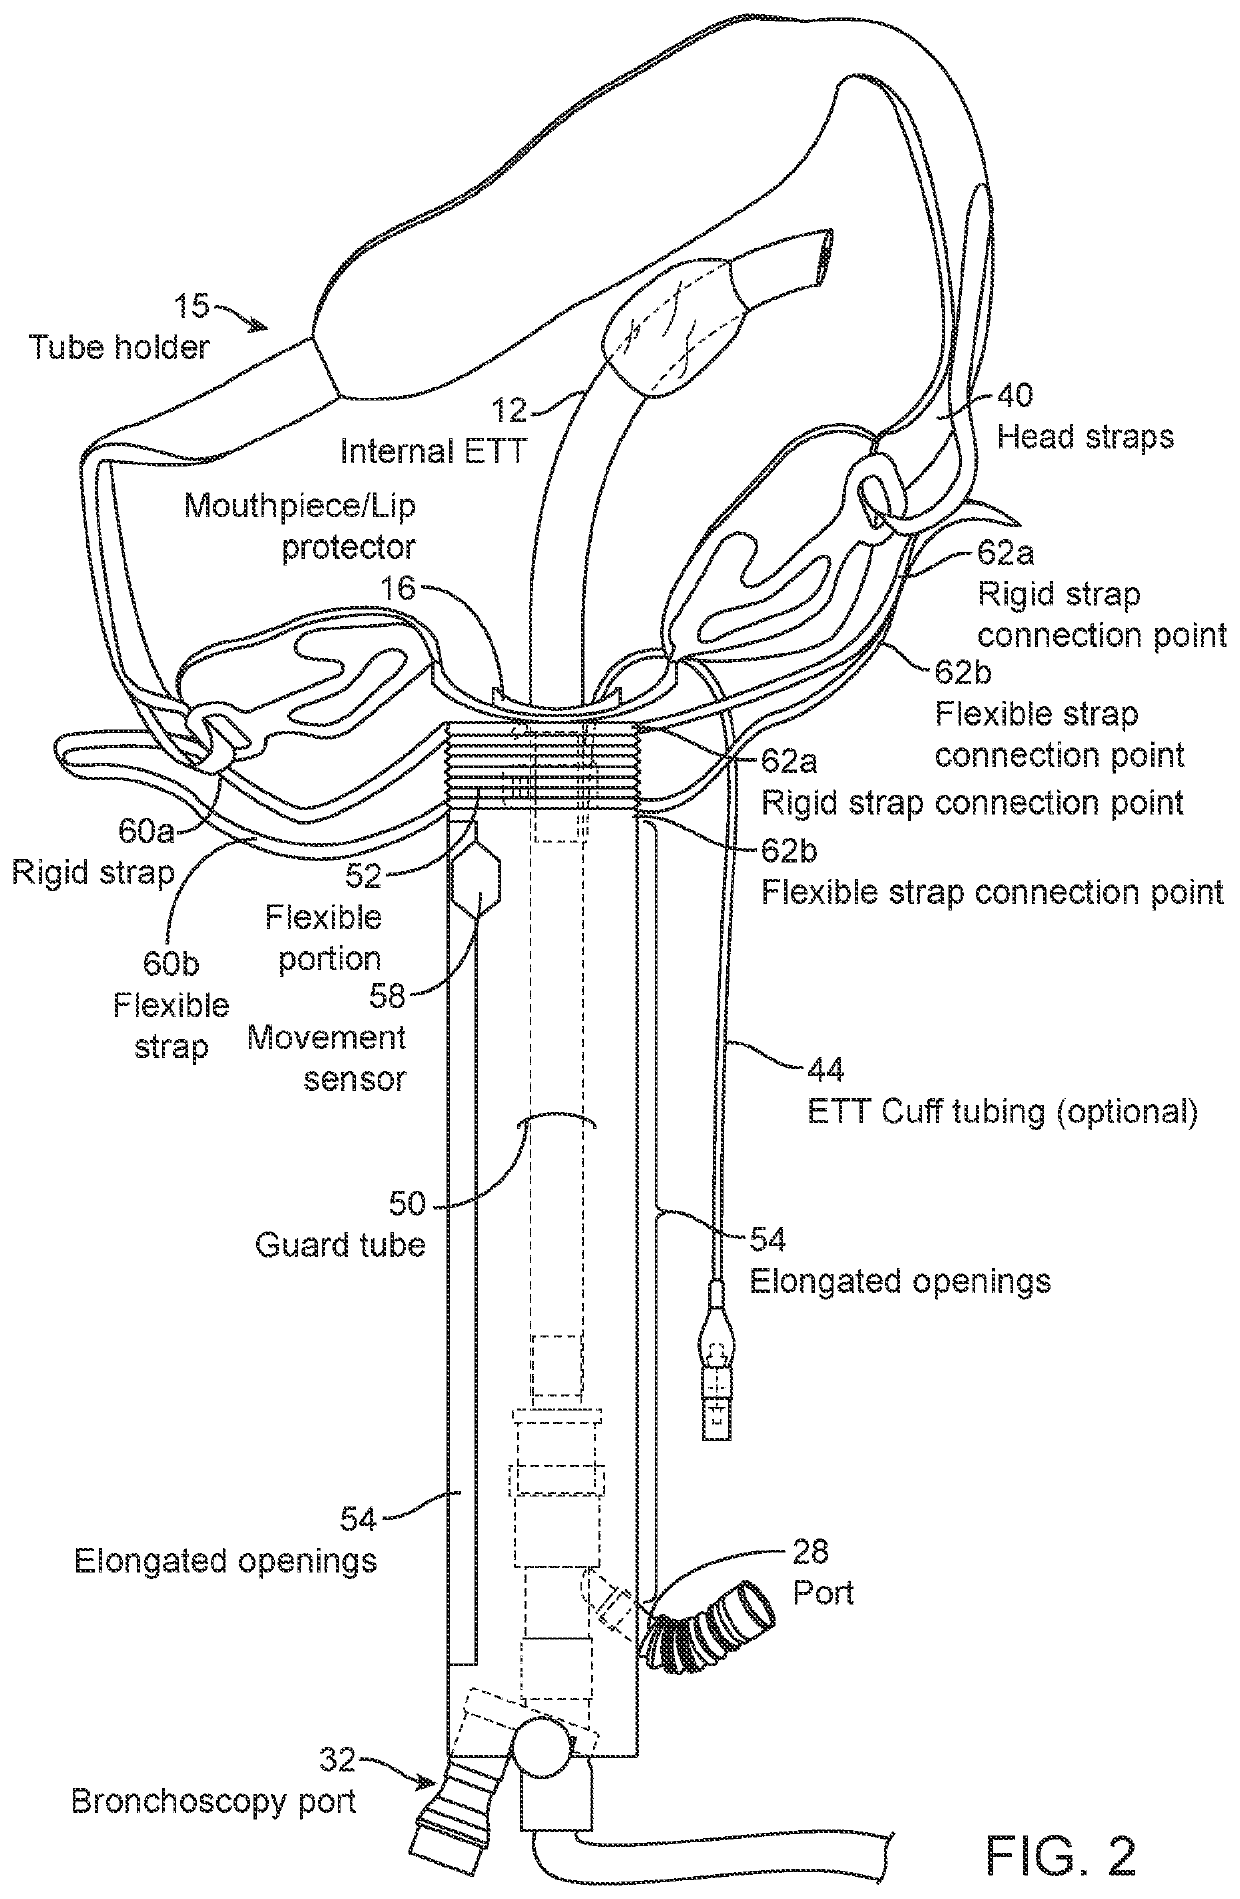 Endotracheal tube guard with optional holding system and optional sensor